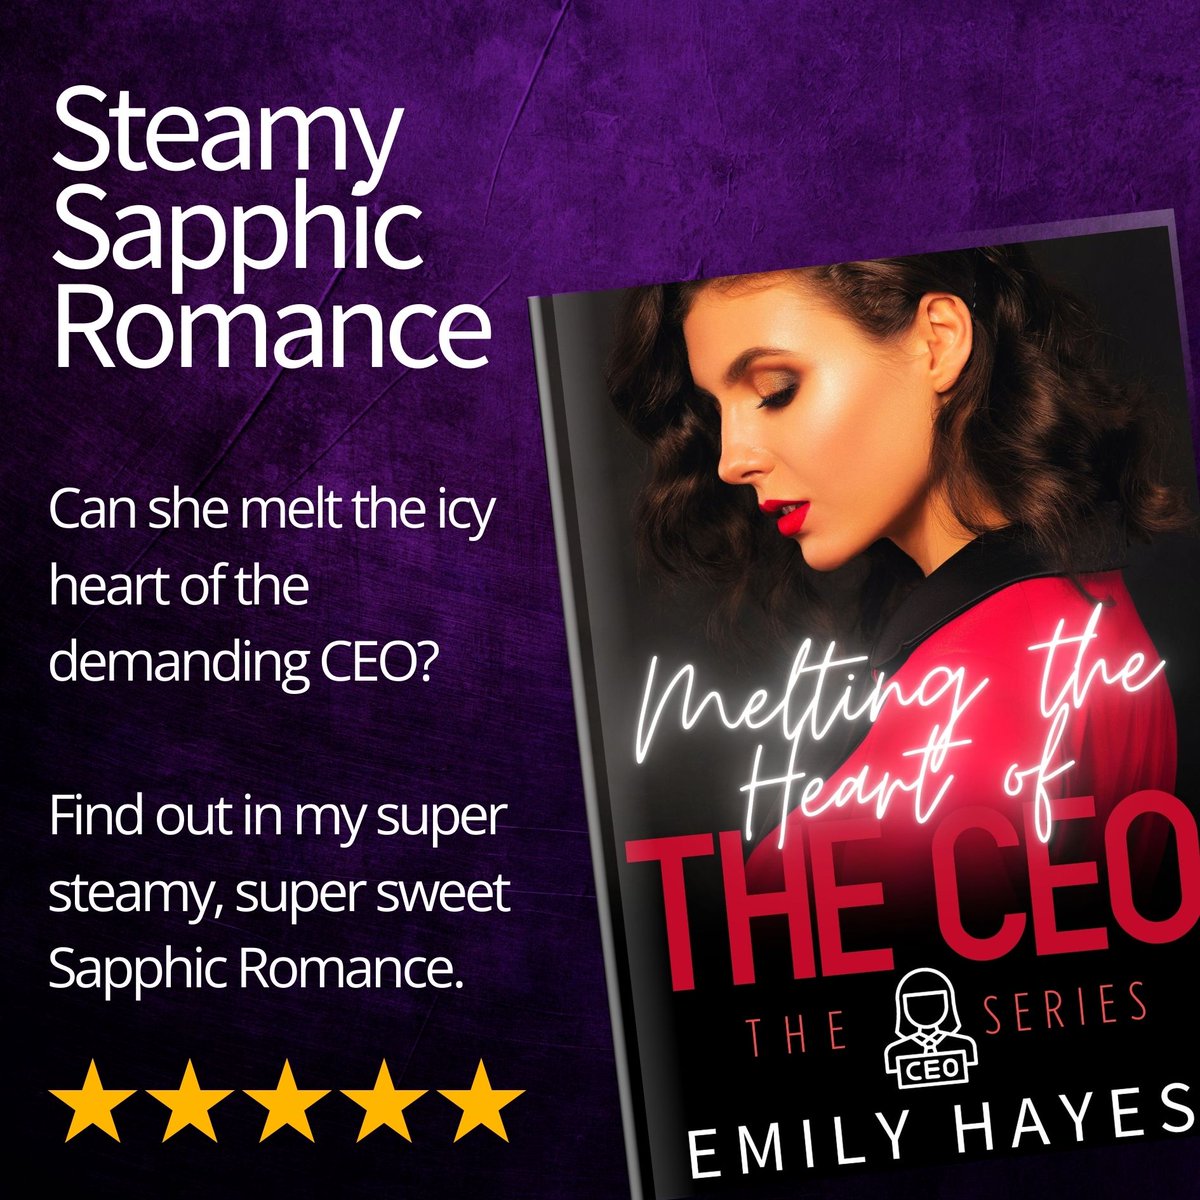 Can Sofie melt the icy heart of the demanding CEO? 

Or will their sizzling attraction lead to disaster? 

Find out in 'Melting the Heart of the CEO'! 🔥🌈💼  find out here mybook.to/CEO6

#LesbianRomance #AgeGapLove #SapphicBooks